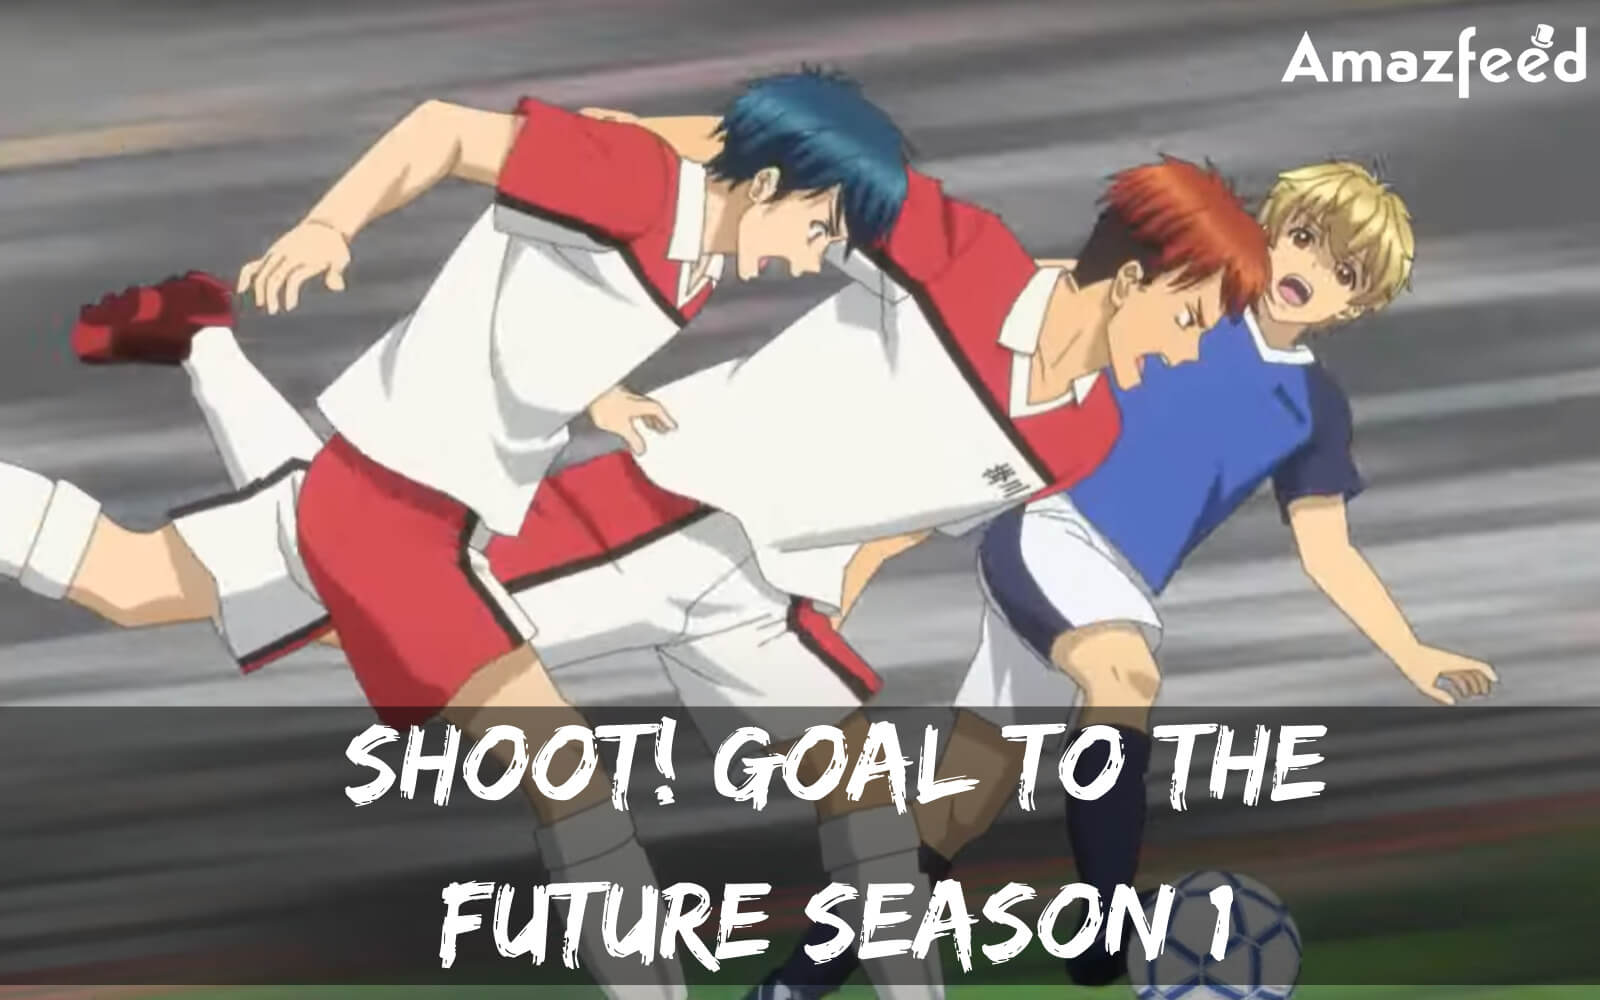 Shoot! Goal to the Future Season 2 Release Date & Possibility